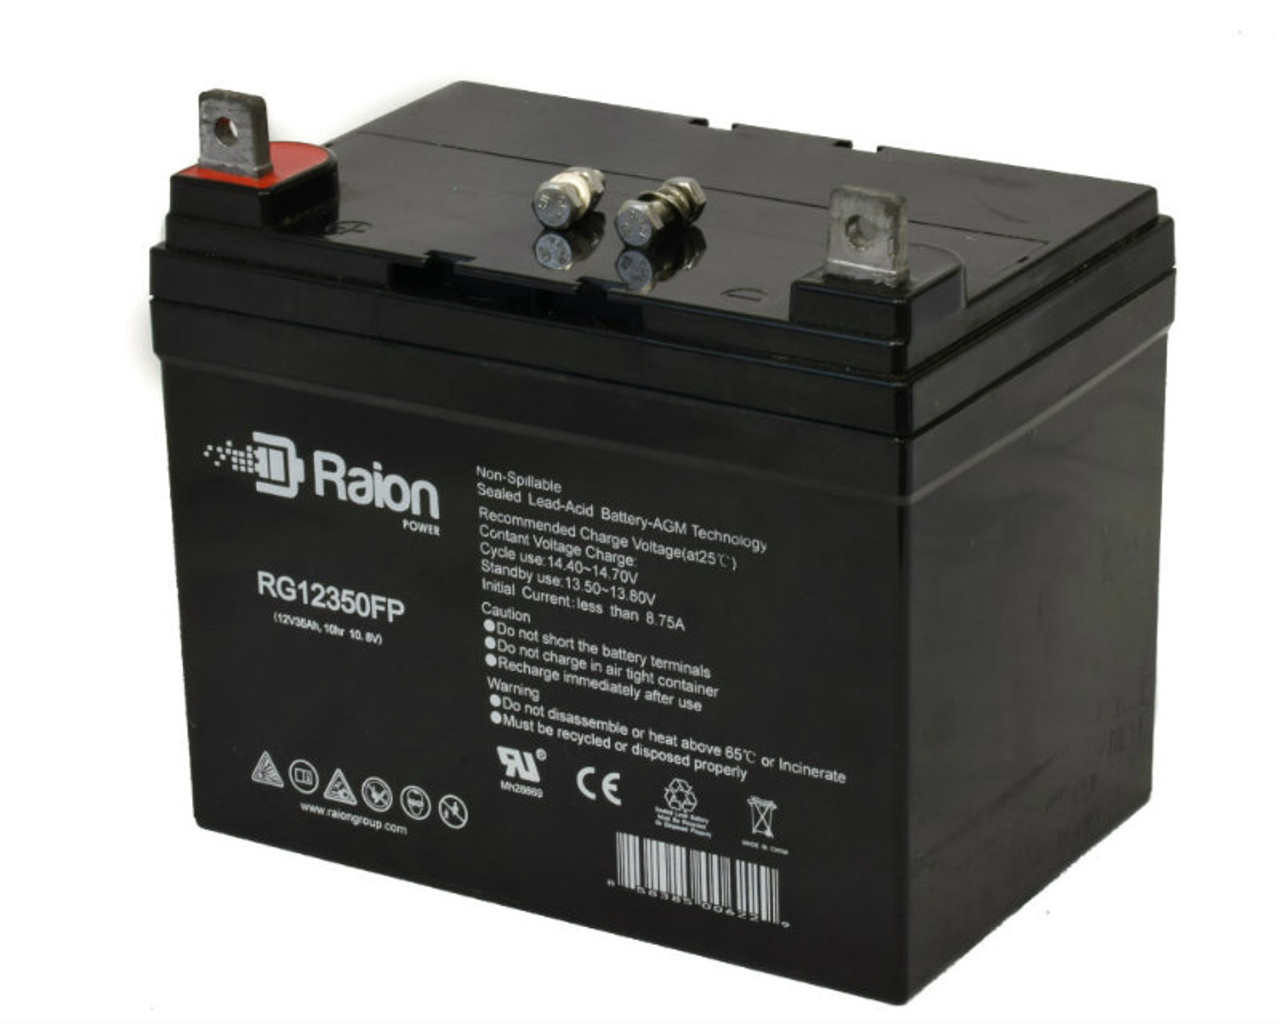 Raion Power Replacement 12V 35Ah RG12350FP Mobility Scooter Battery for Redman 107SRX